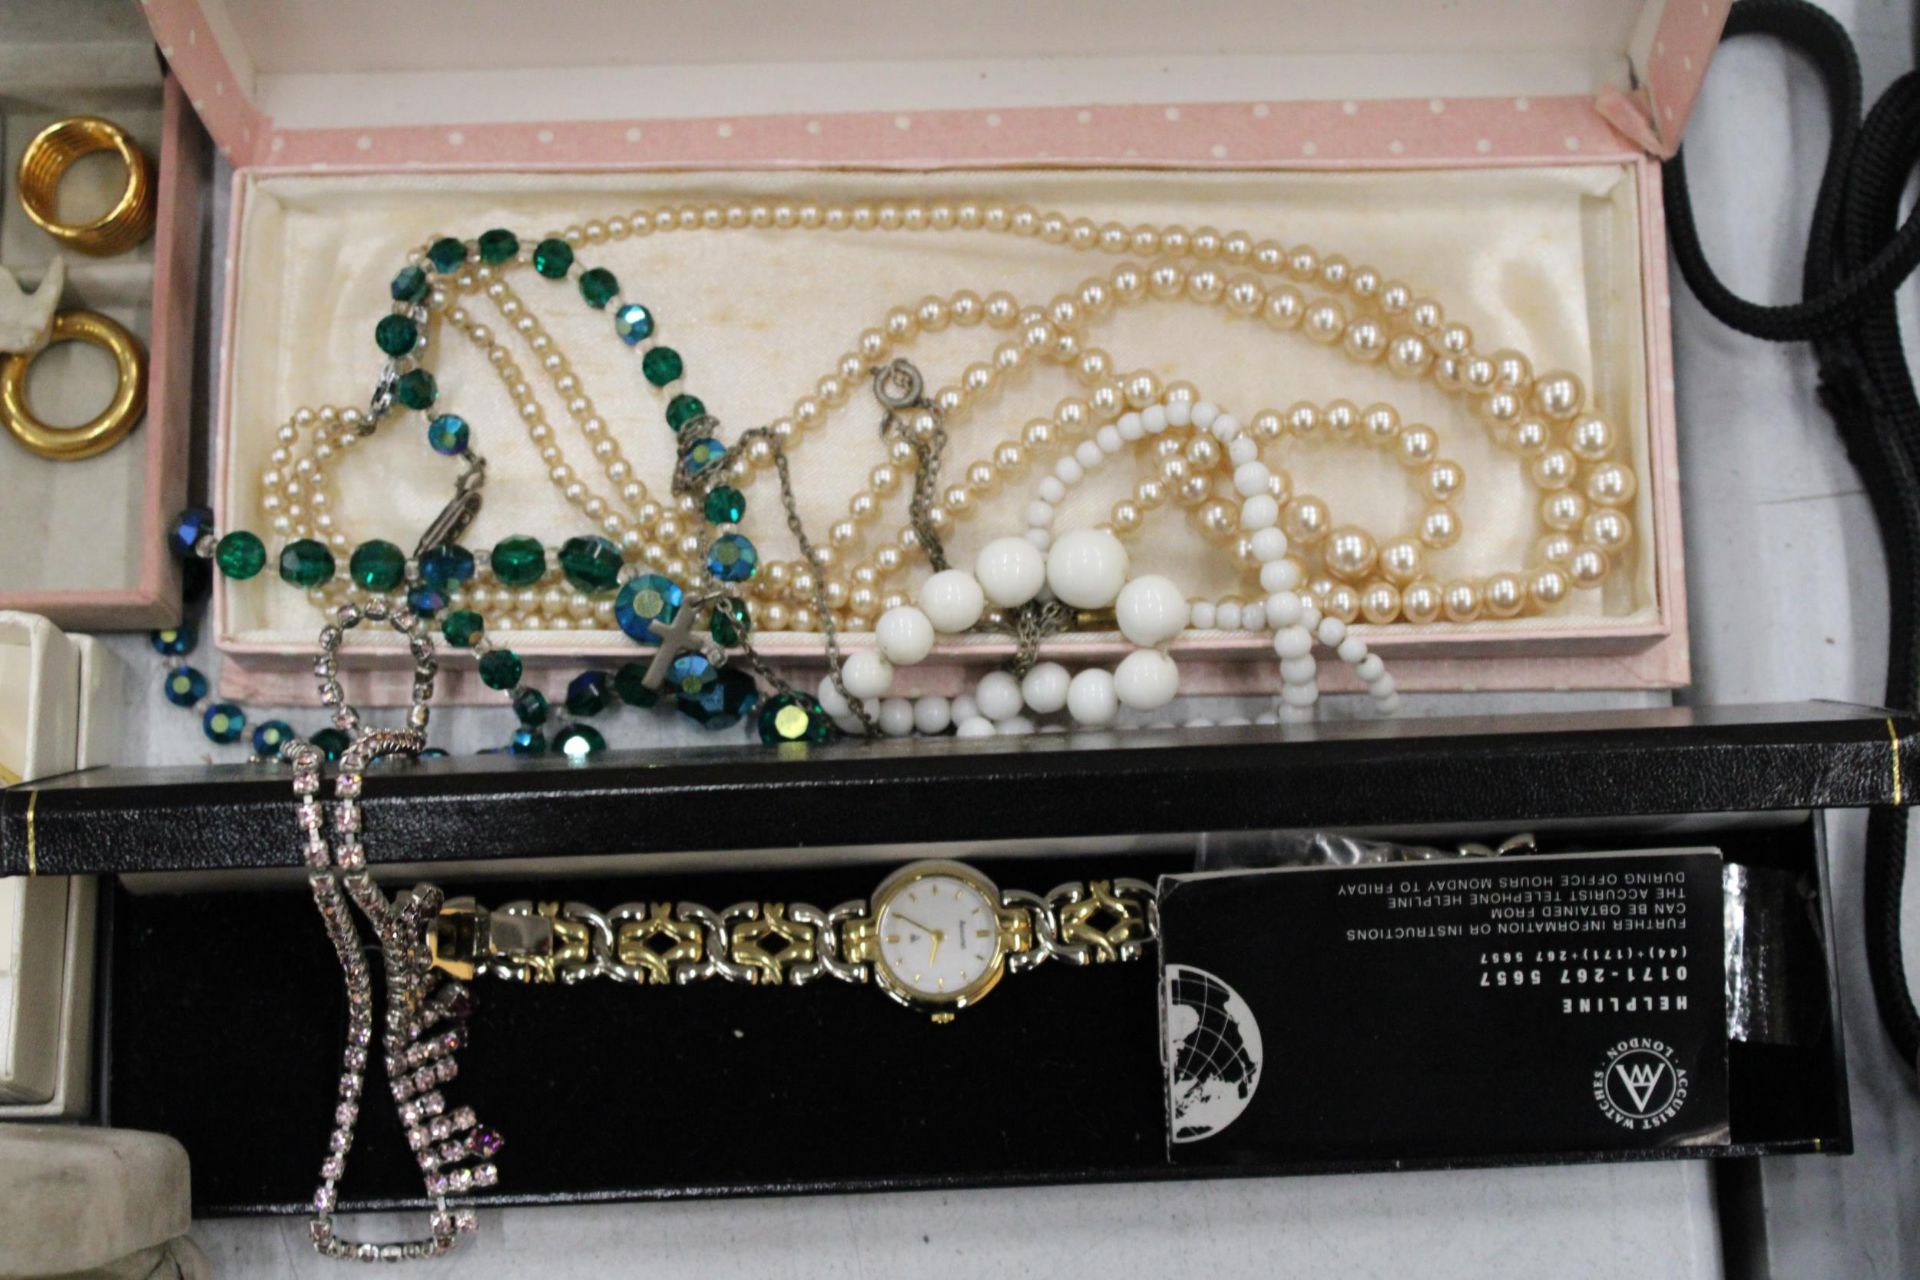 A QUANTITYOF COSTUME JEWELLERY TO INCLUDE WATCHES, NECKLACES, EARRINGS, BEADS, BANGLES, ETC - Image 2 of 5